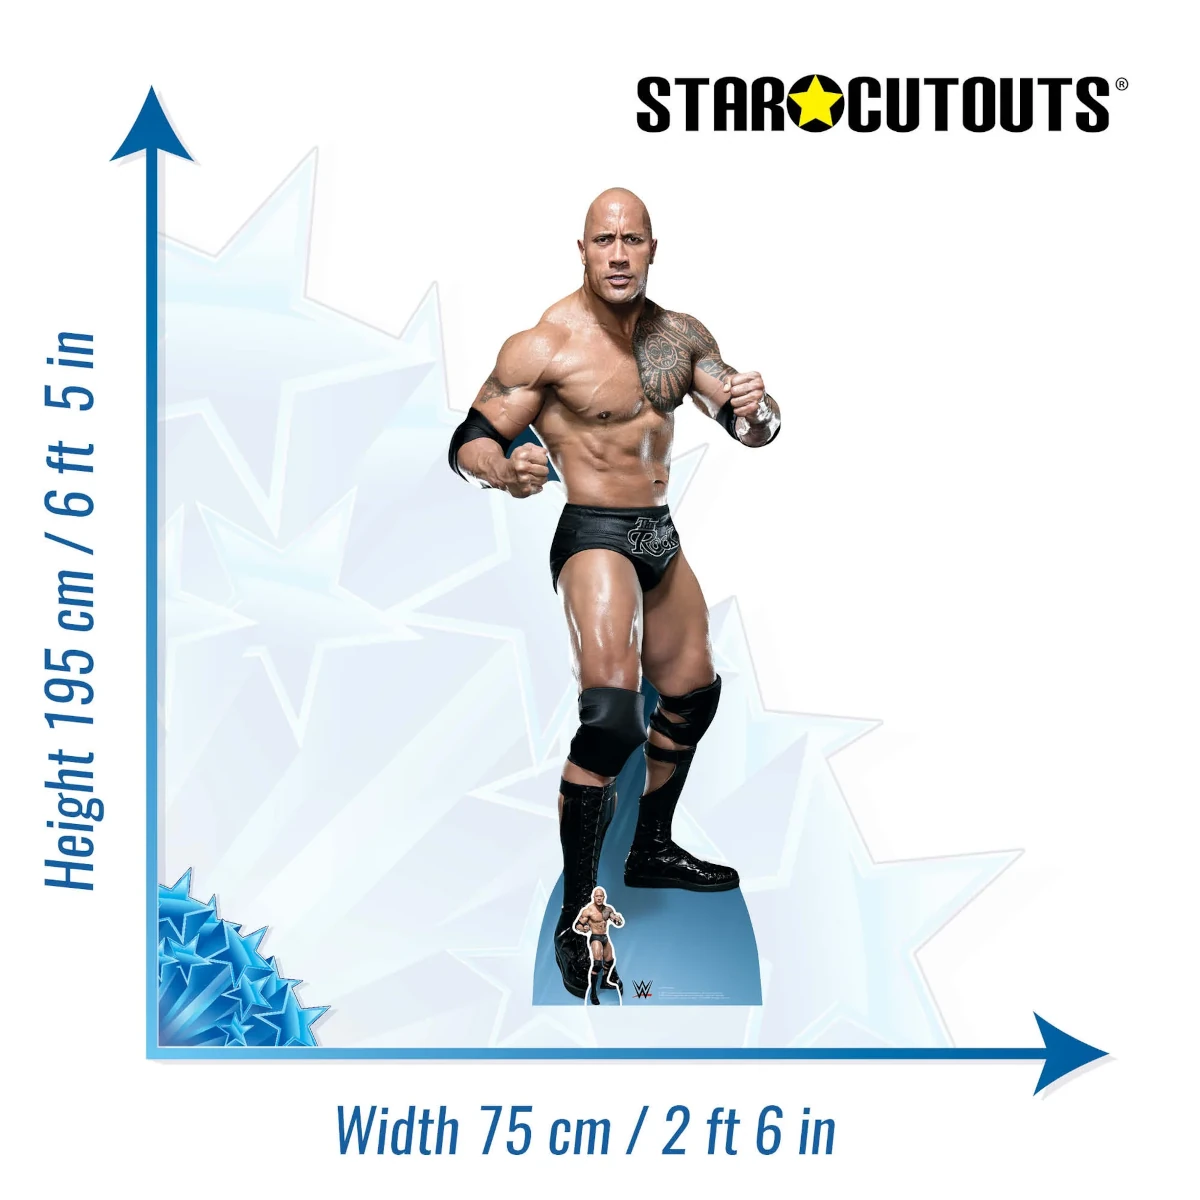 SC1239 The Rock 'Just Bring It' (WWE) Official Lifesize + Mini Cardboard Cutout Standee Size